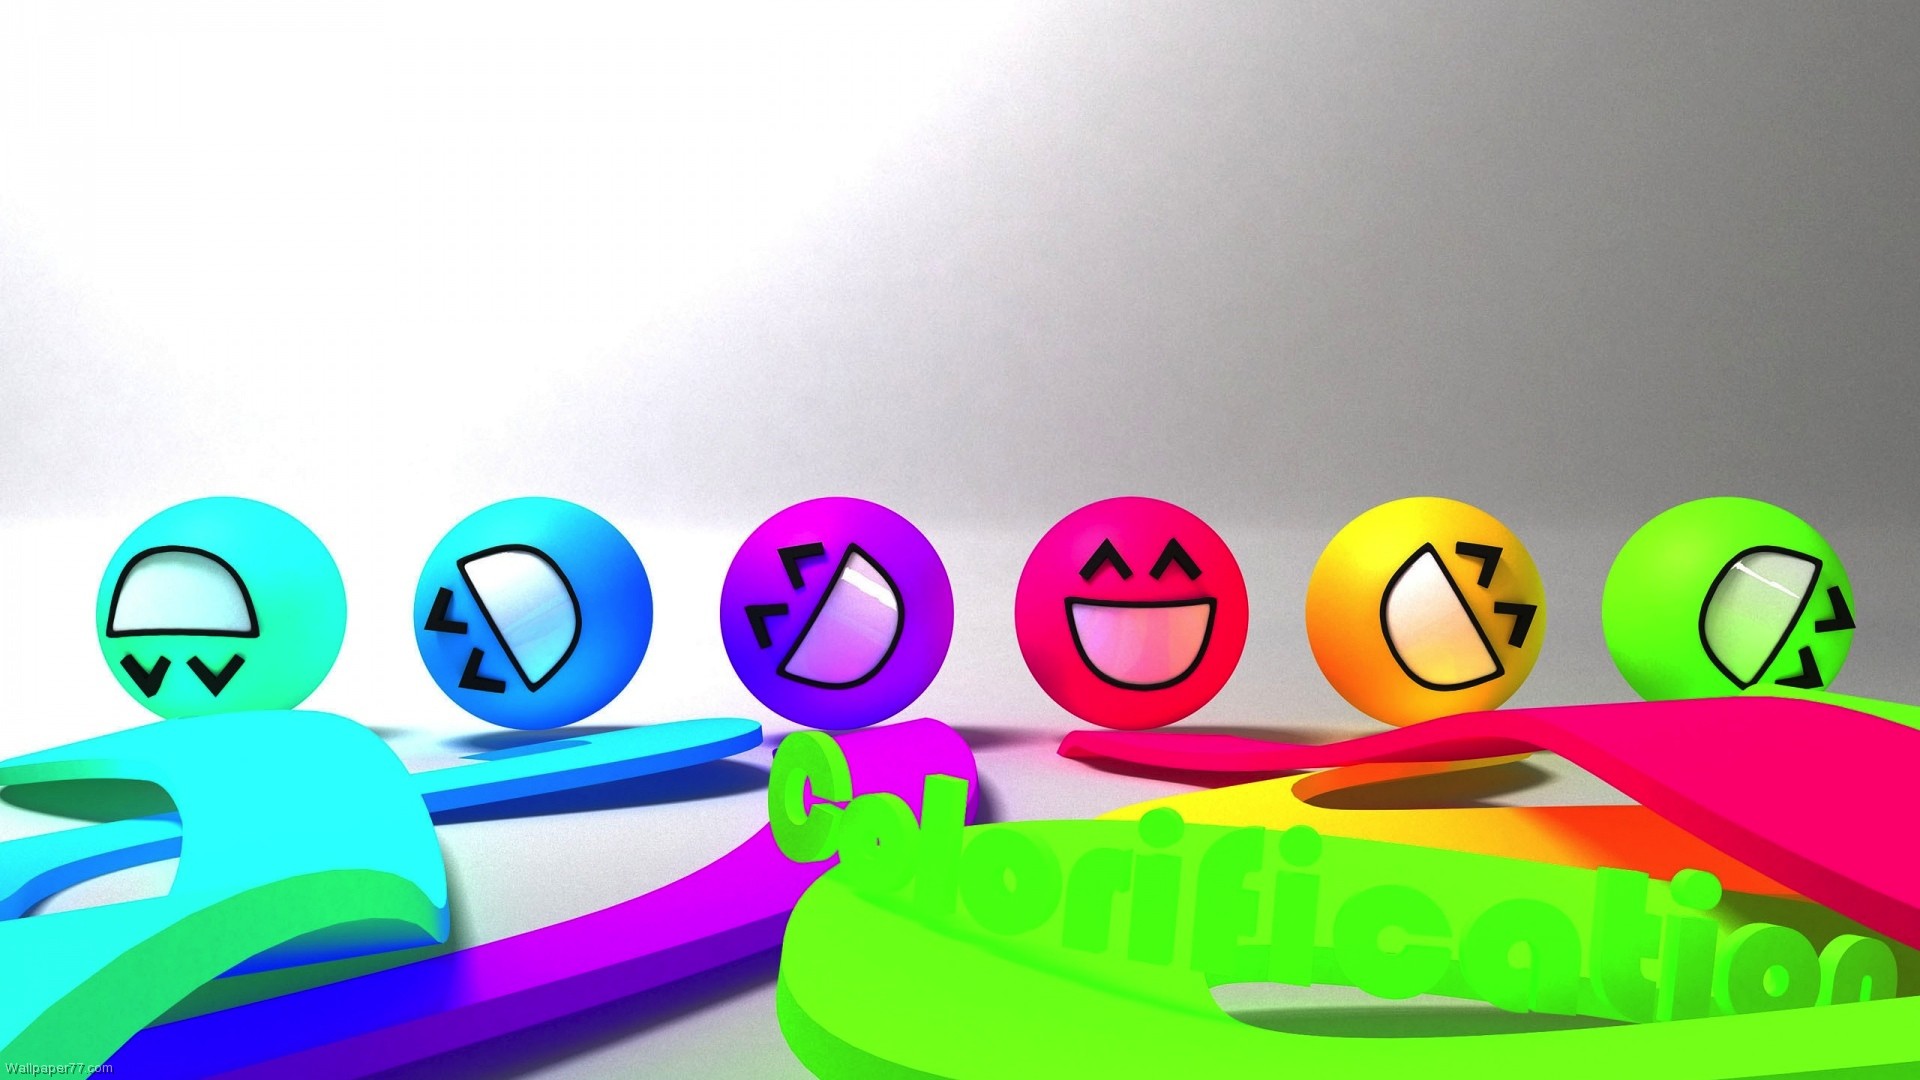 Colorful Smiley Faces fun wallpapers funny wallpapers cute 1920x1080